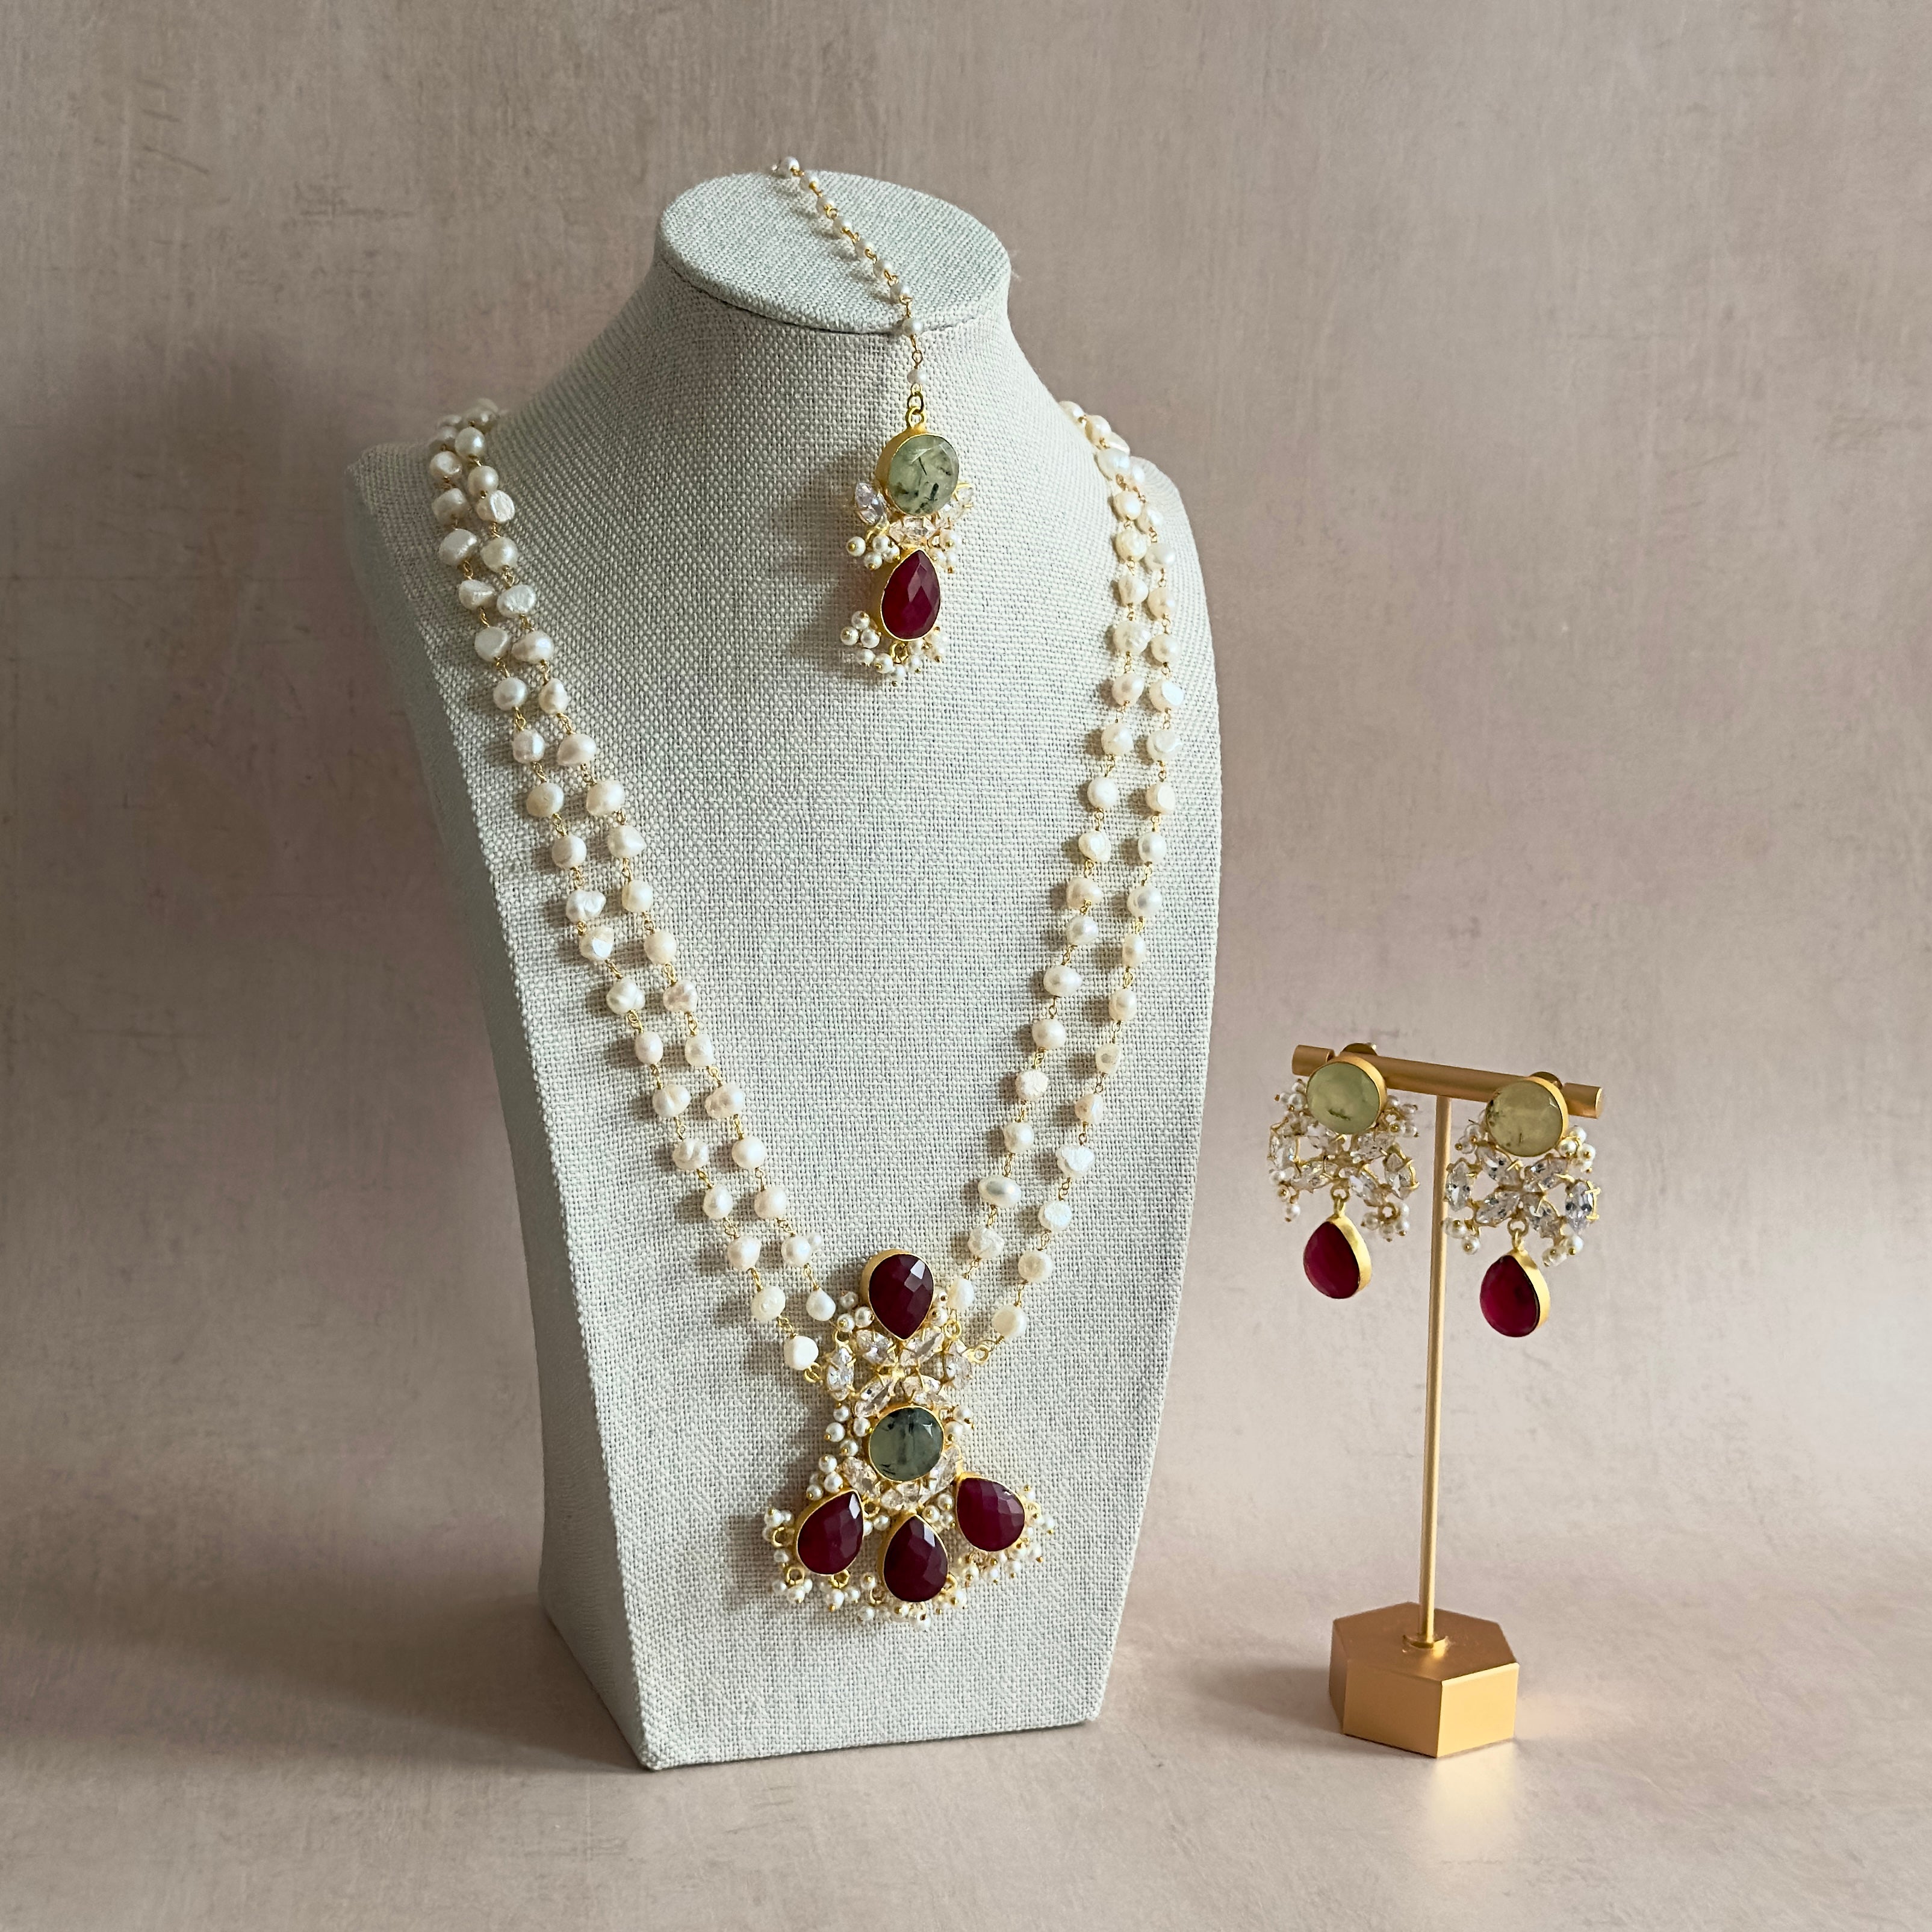 Get ready to turn heads with the Madiha Crystal Mala Set! This stunning 3-piece set features deep red and prehnite gemstones, adding elegance and charm to any outfit. The adjustable tie ensures a perfect fit, and it comes complete with earrings and tikka for a glamorous look. Perfect for a touch of sparkle and shine!